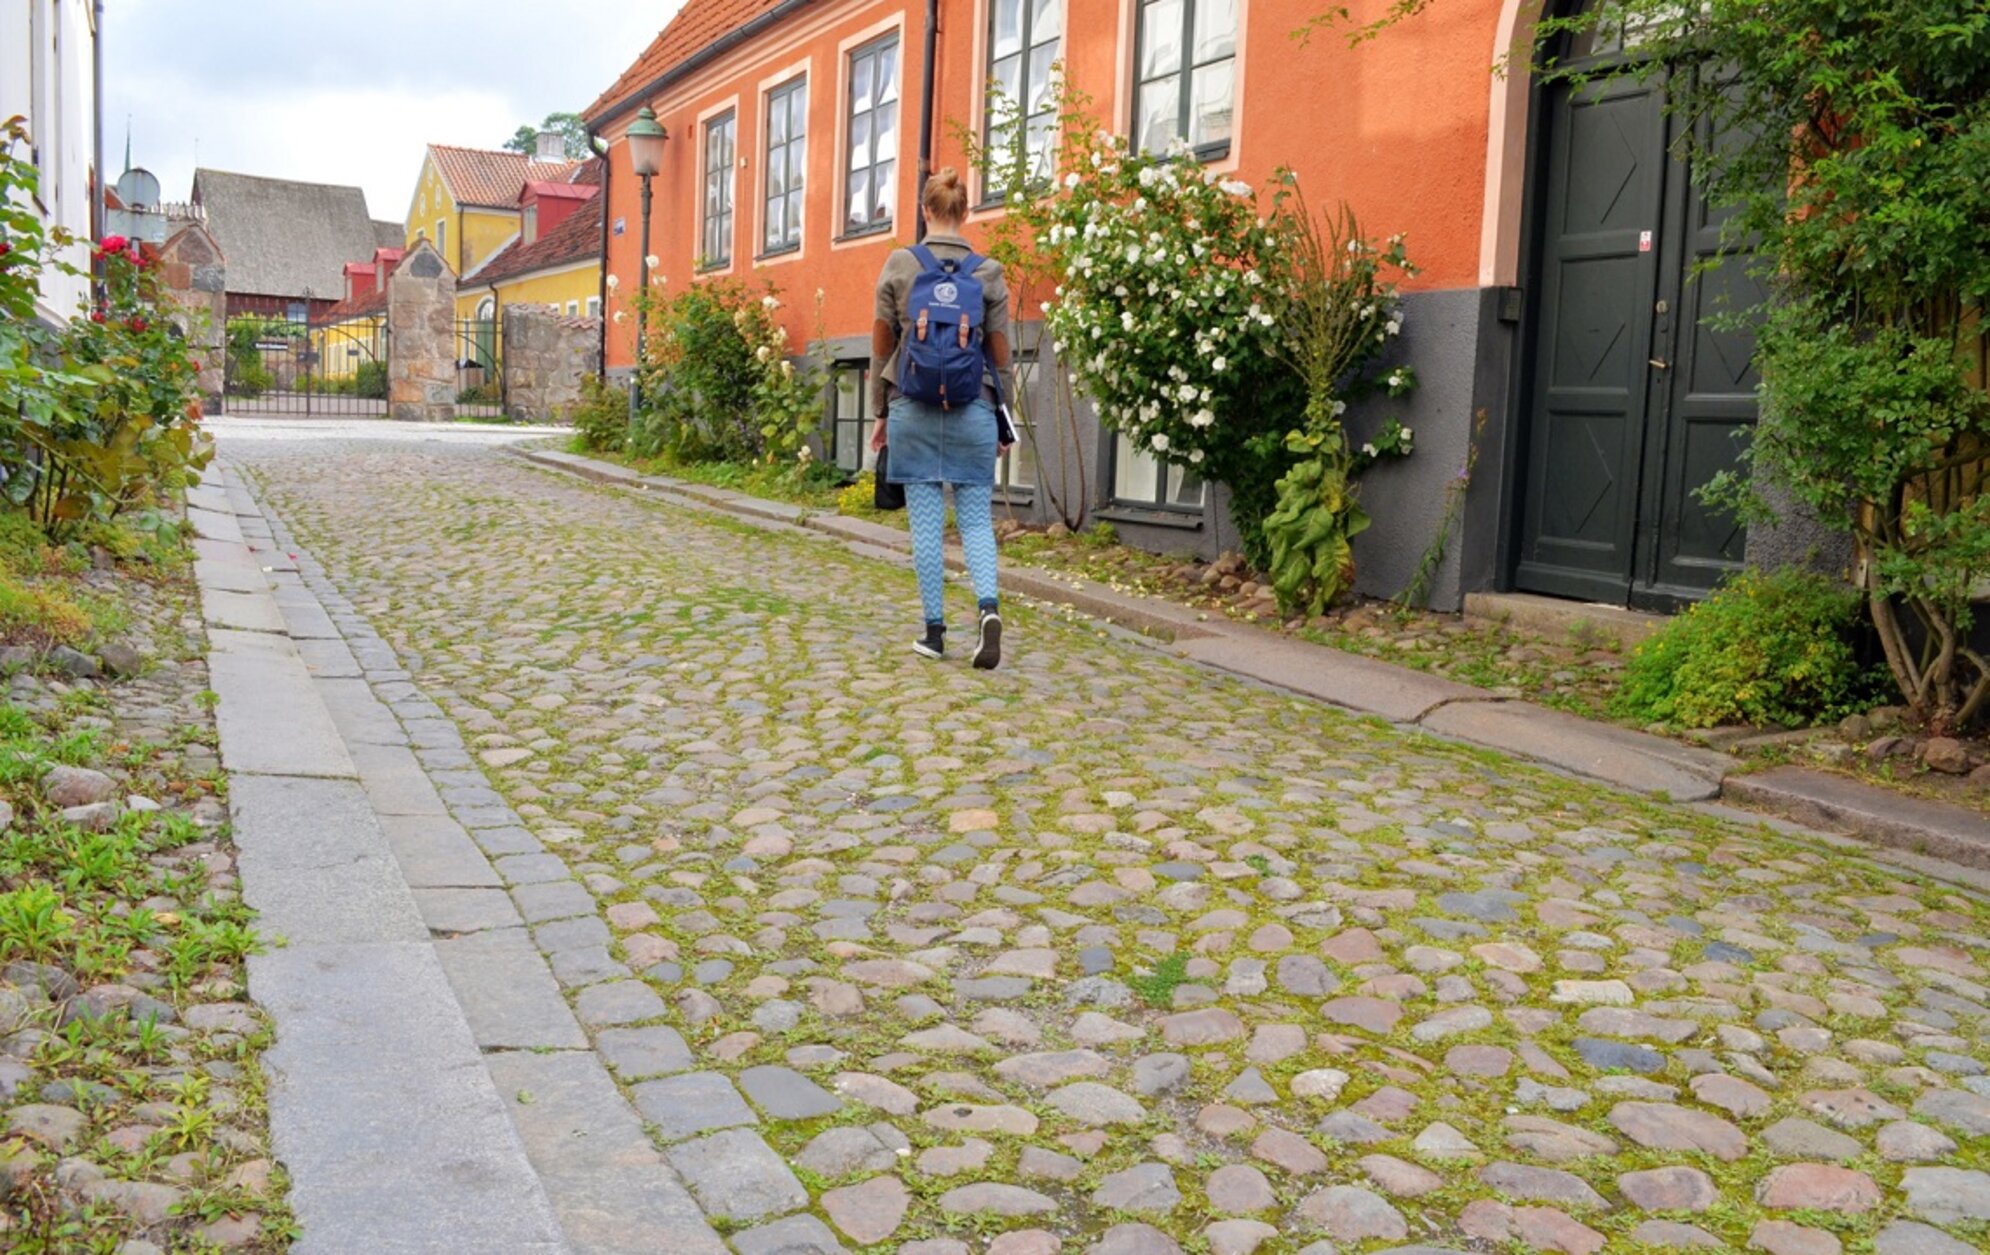 Student walking on cobblestones with a book in one hand